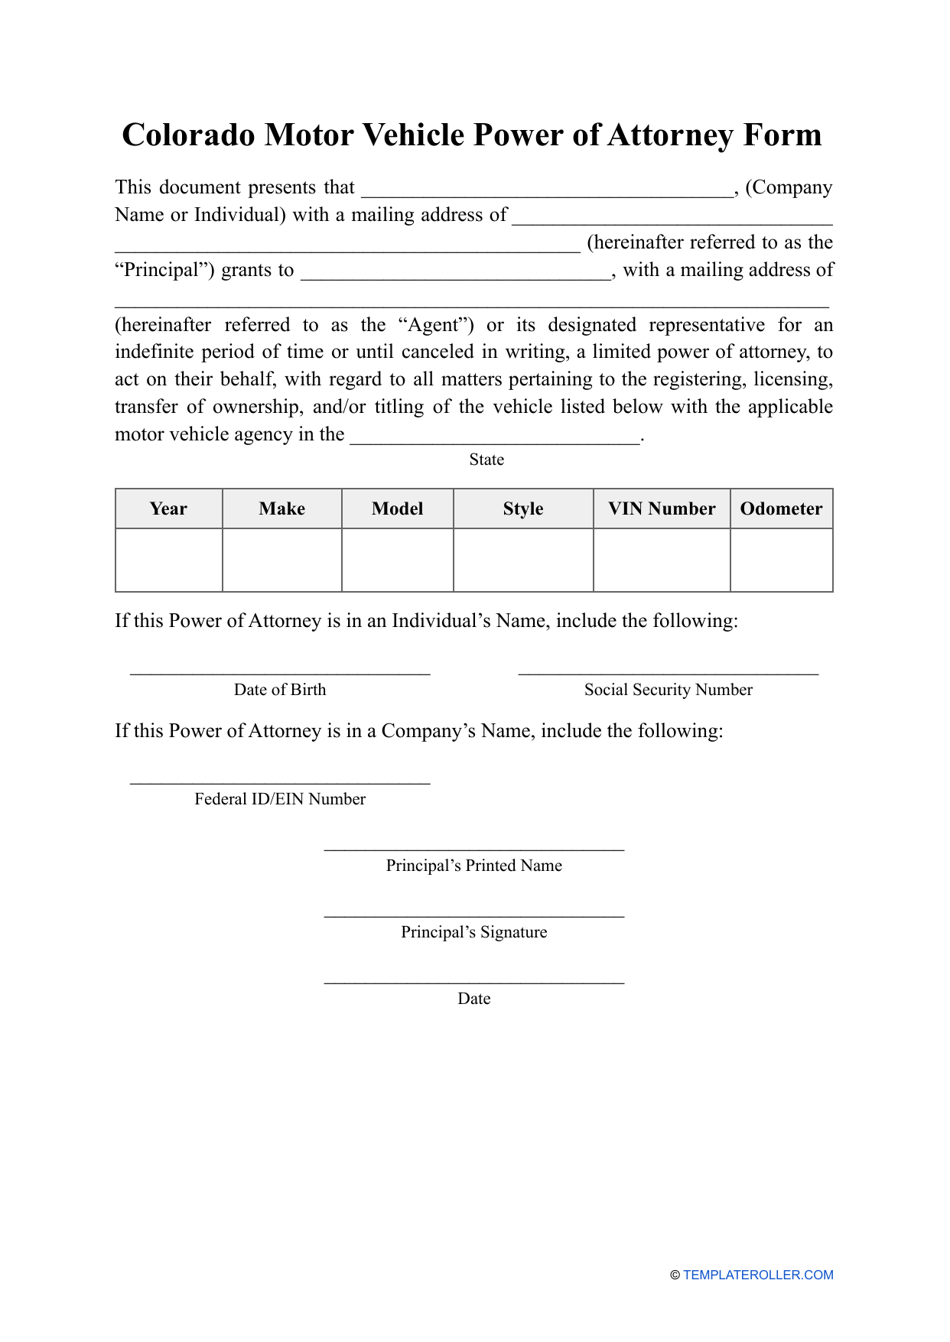 Motor Vehicle Power of Attorney Form - Colorado, Page 1